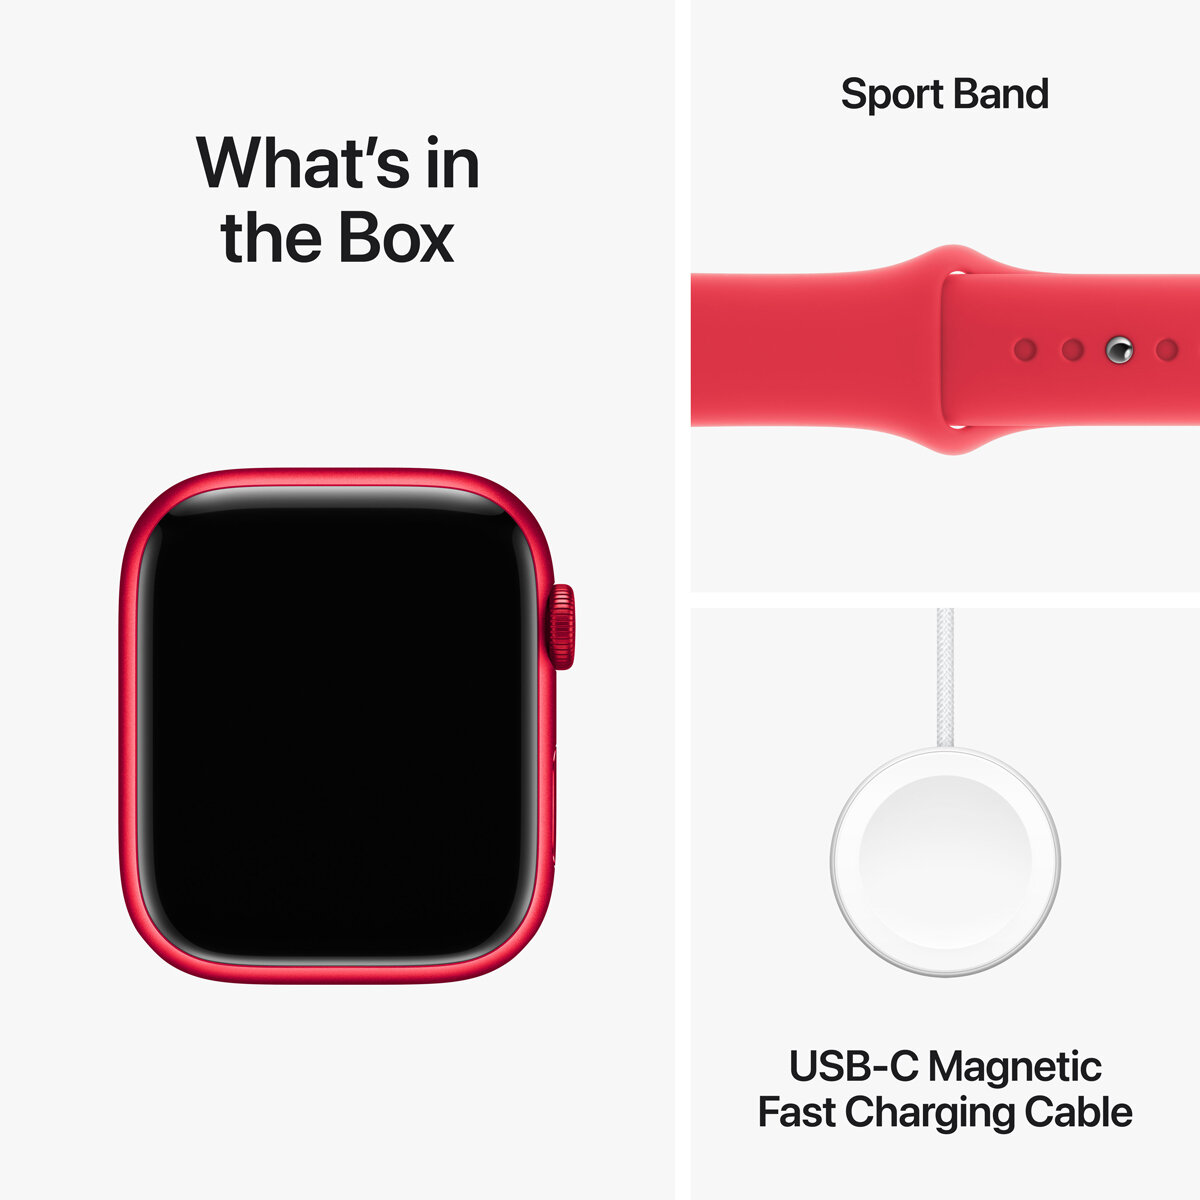 Apple Watch Series 9 Cellular, 45mm Product(Red) Aluminium Case with Product(Red) Sport Band S/M, MRYE3QA/A